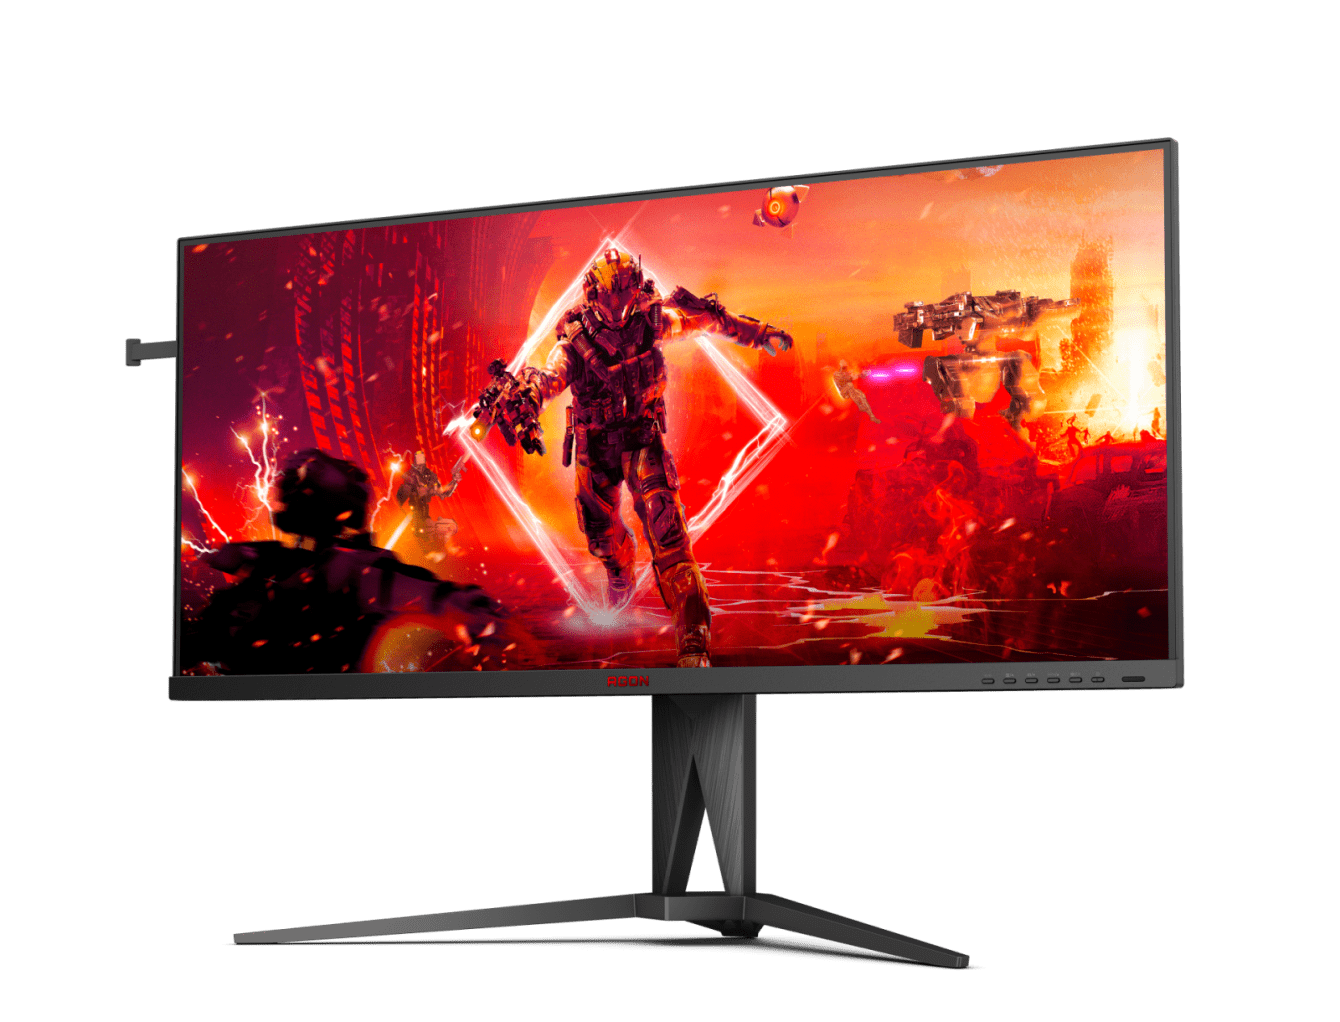 AGON by AOC's guide to choosing monitors and gaming accessories